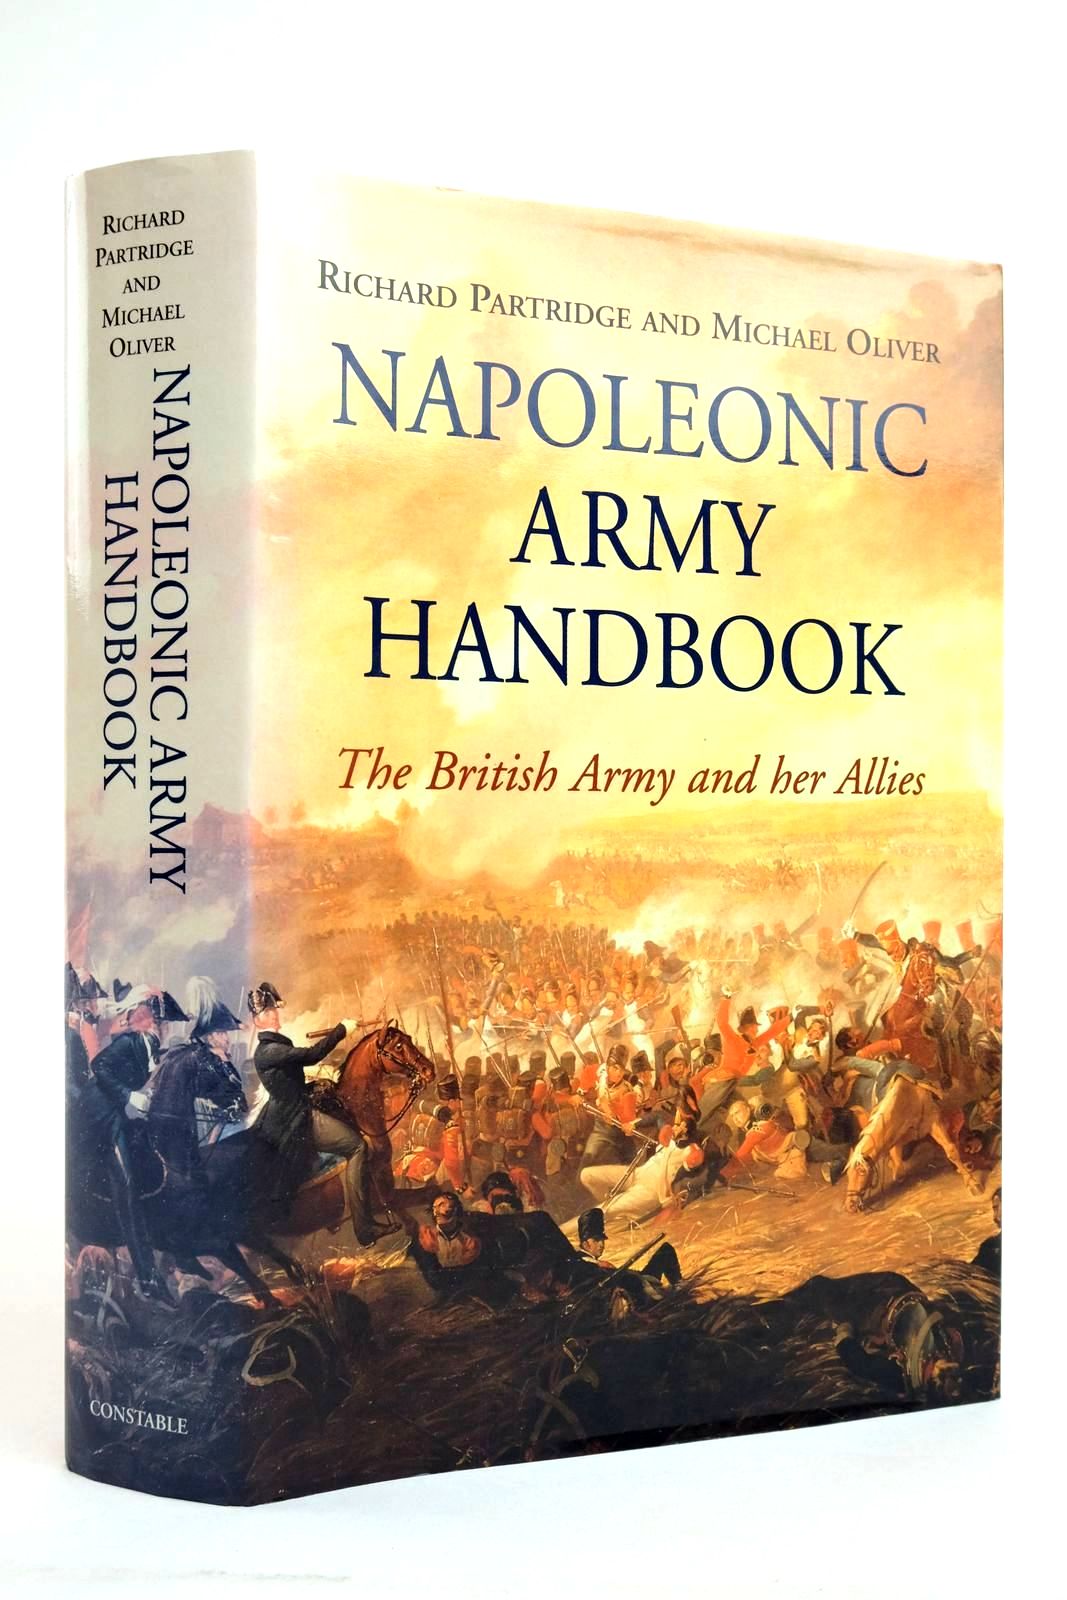 Photo of NAPOLEONIC ARMY HANDBOOK: THE BRITISH ARMY AND HER ALLIES written by Partridge, Richard Oliver, Michael published by Constable (STOCK CODE: 2135517)  for sale by Stella & Rose's Books